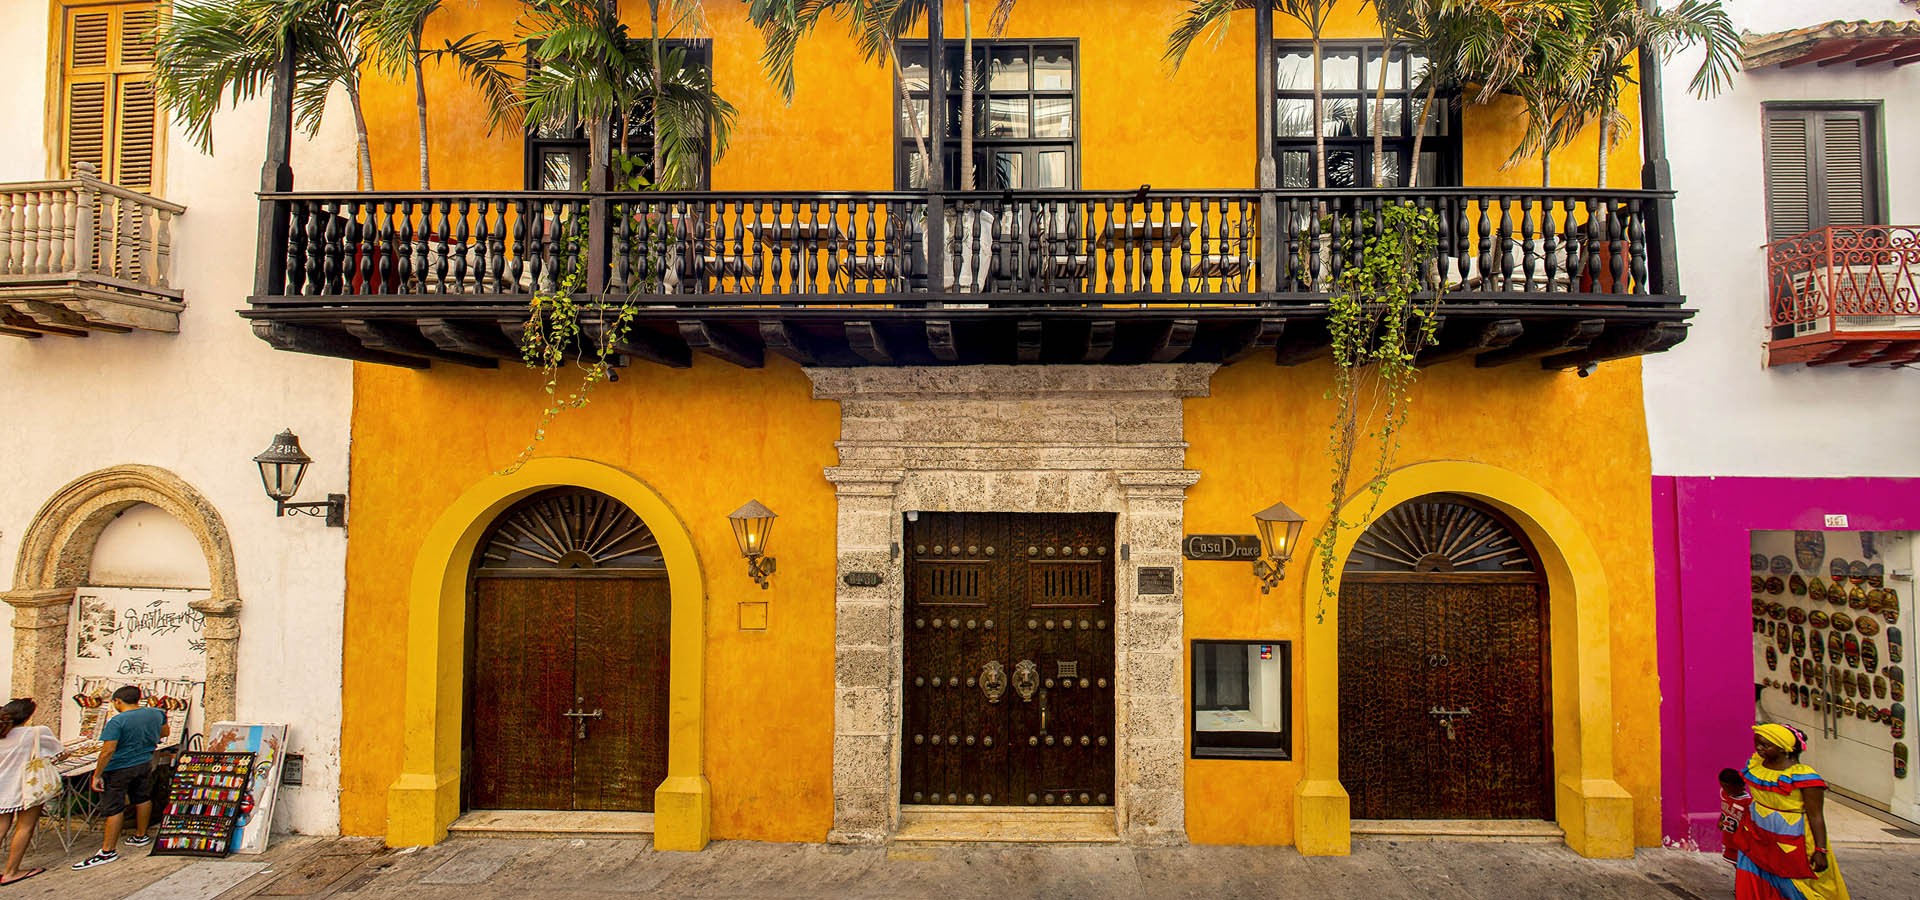 The best boutique hotels in Cartagena